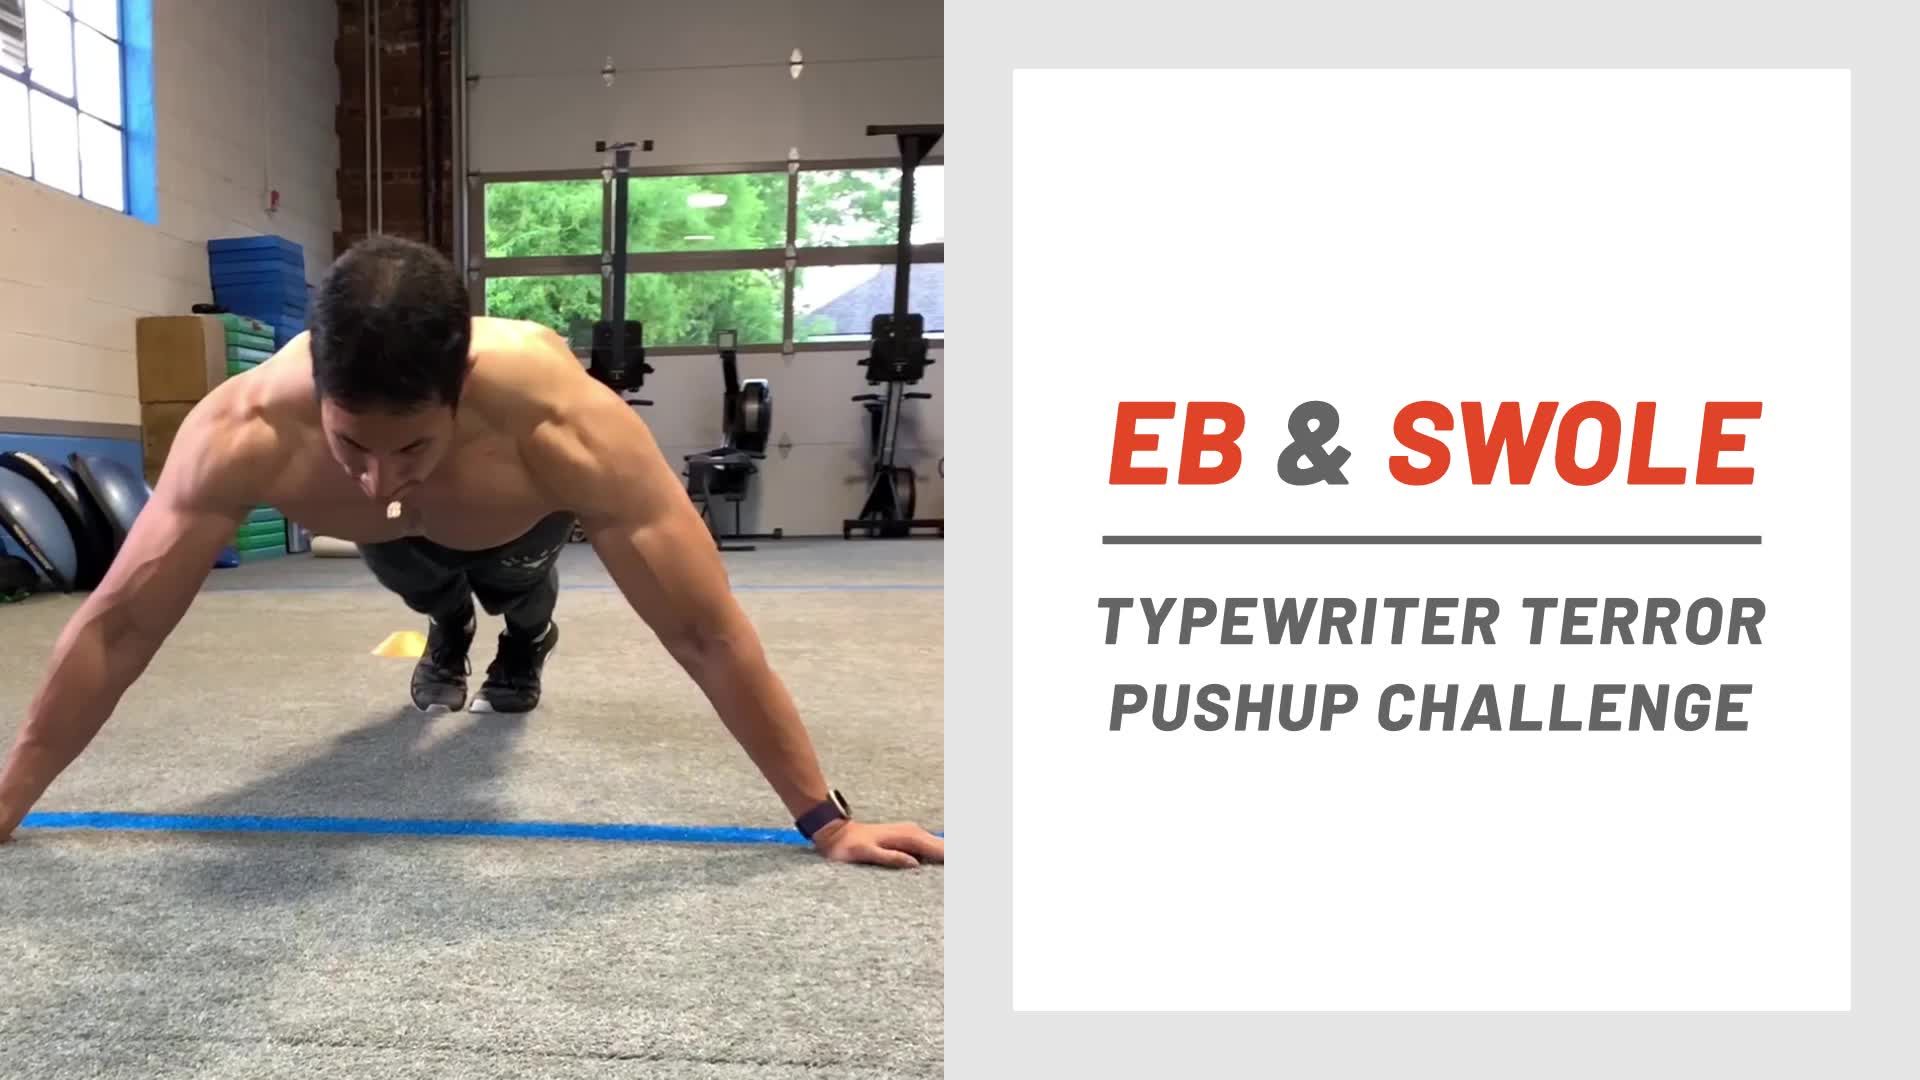 Push Up Challenge Workout With Typewriter and Archer Variations